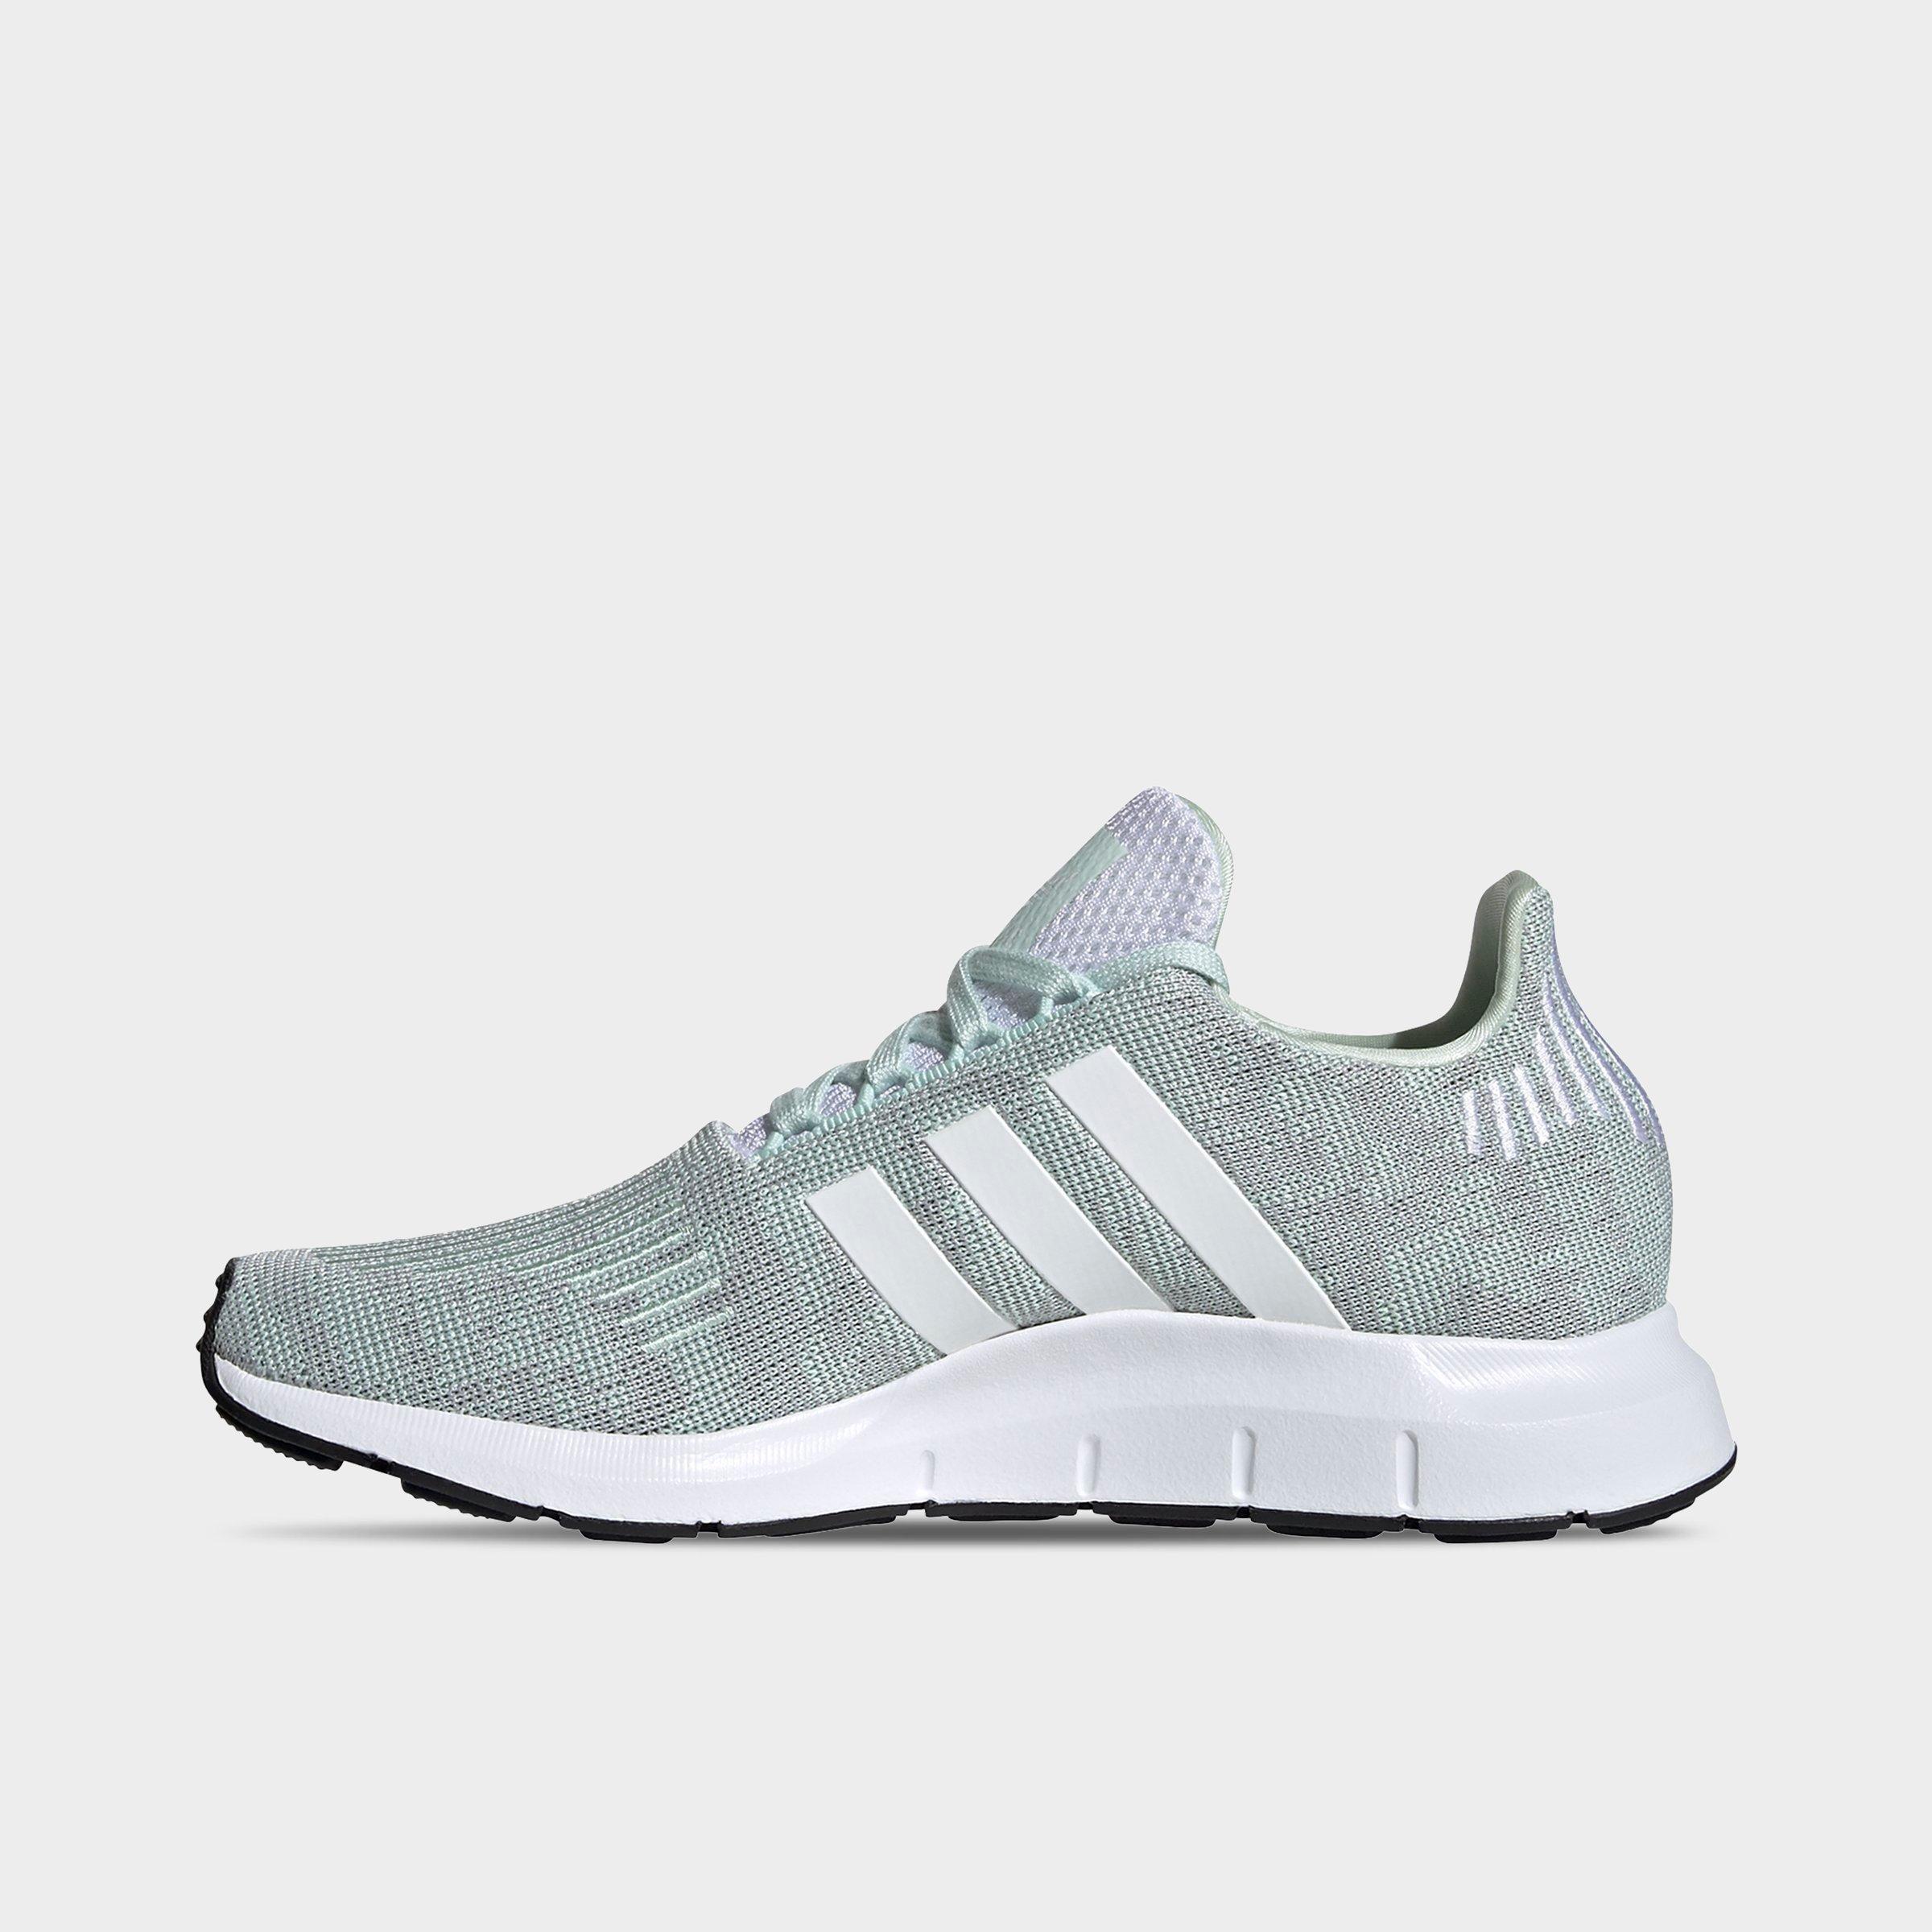 finish line adidas sneakers